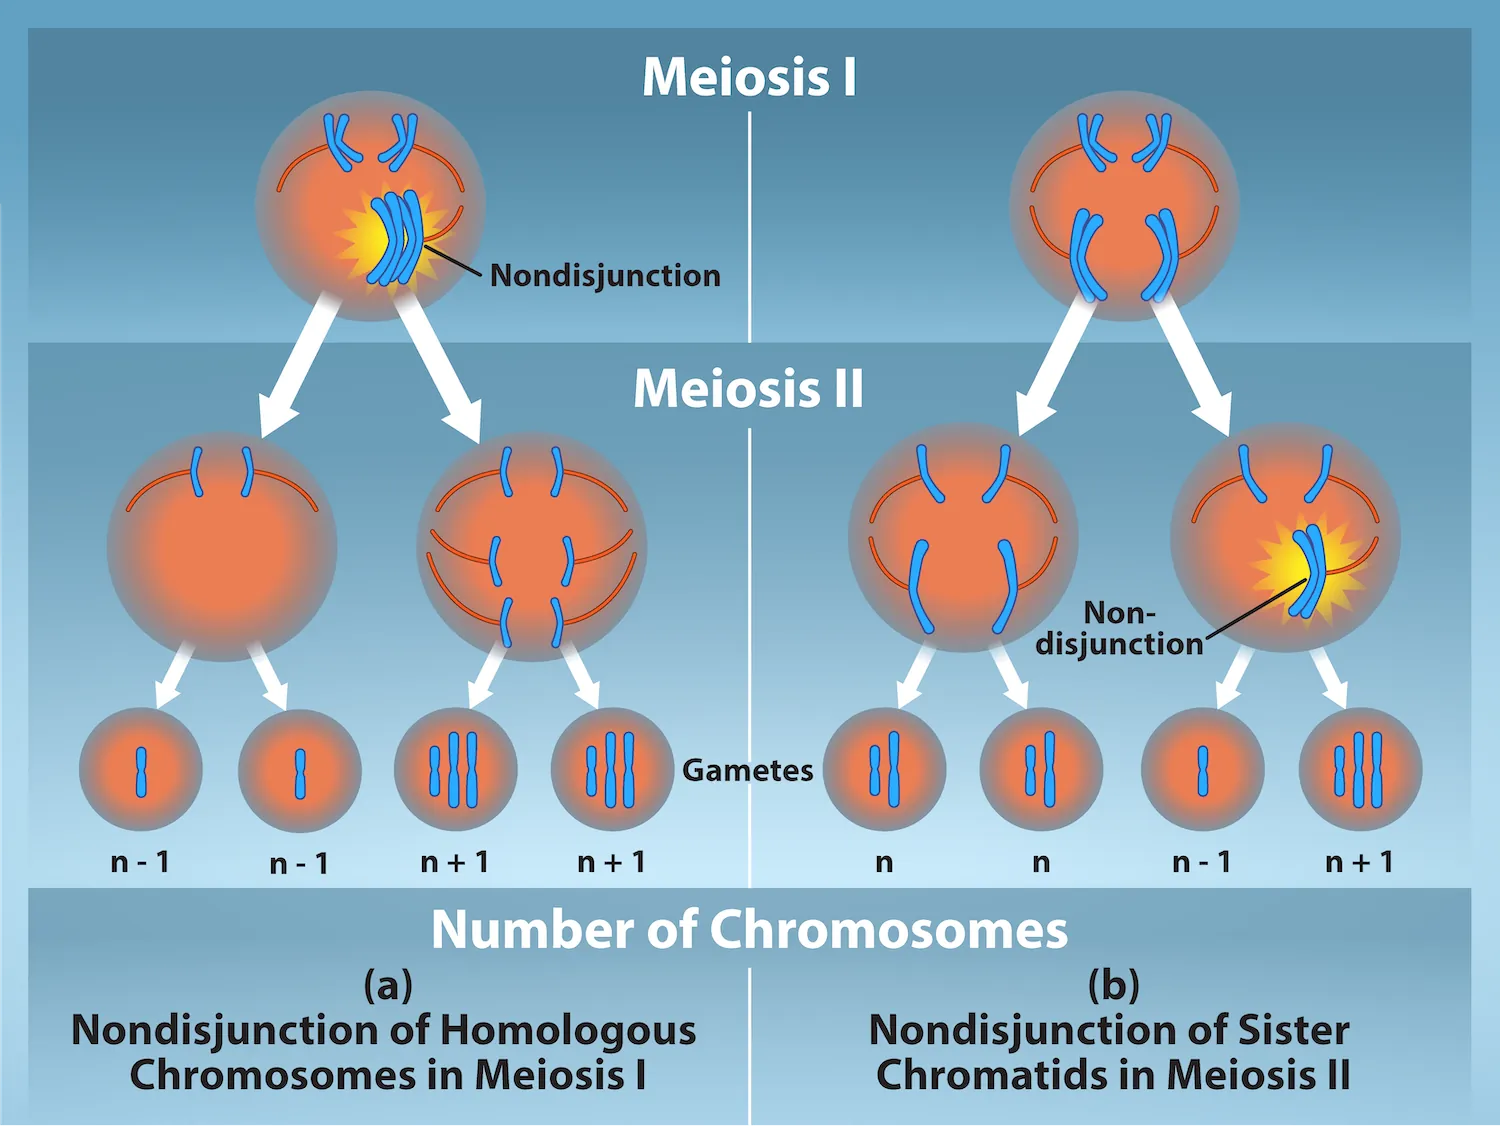 This illustration shows nondisjunction that occurs during meiosis I. Nondisjunction during meiosis I occurs when a homologous pair fails to separate, and results in two gametes with n + 1 chromosomes, and two gametes with n  minus 1 chromosomes. Nondisjunction during meiosis I I would occur when sister chromatids fail to separate, and results in one gamete with n + 1 chromosomes, one gamete with n minus 1 chromosomes, and two normal gametes.